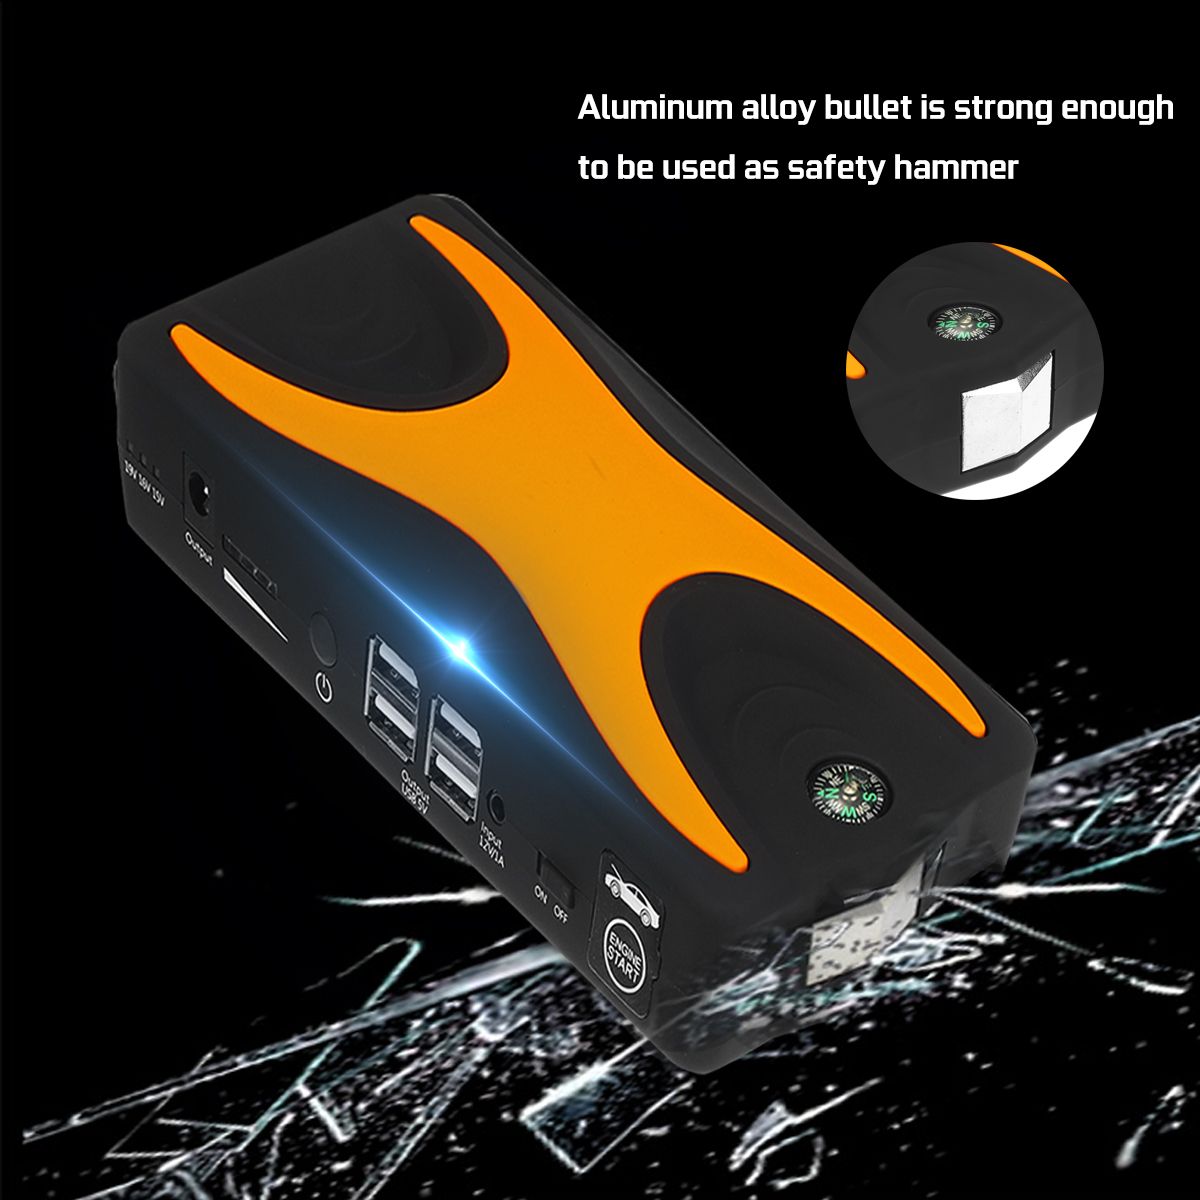 D28A-Portable-Car-Jump-Starter-12V-22000mAh-Emergency-Battery-Booster-with-LED-FlashLight-Safety-Ham-1458786